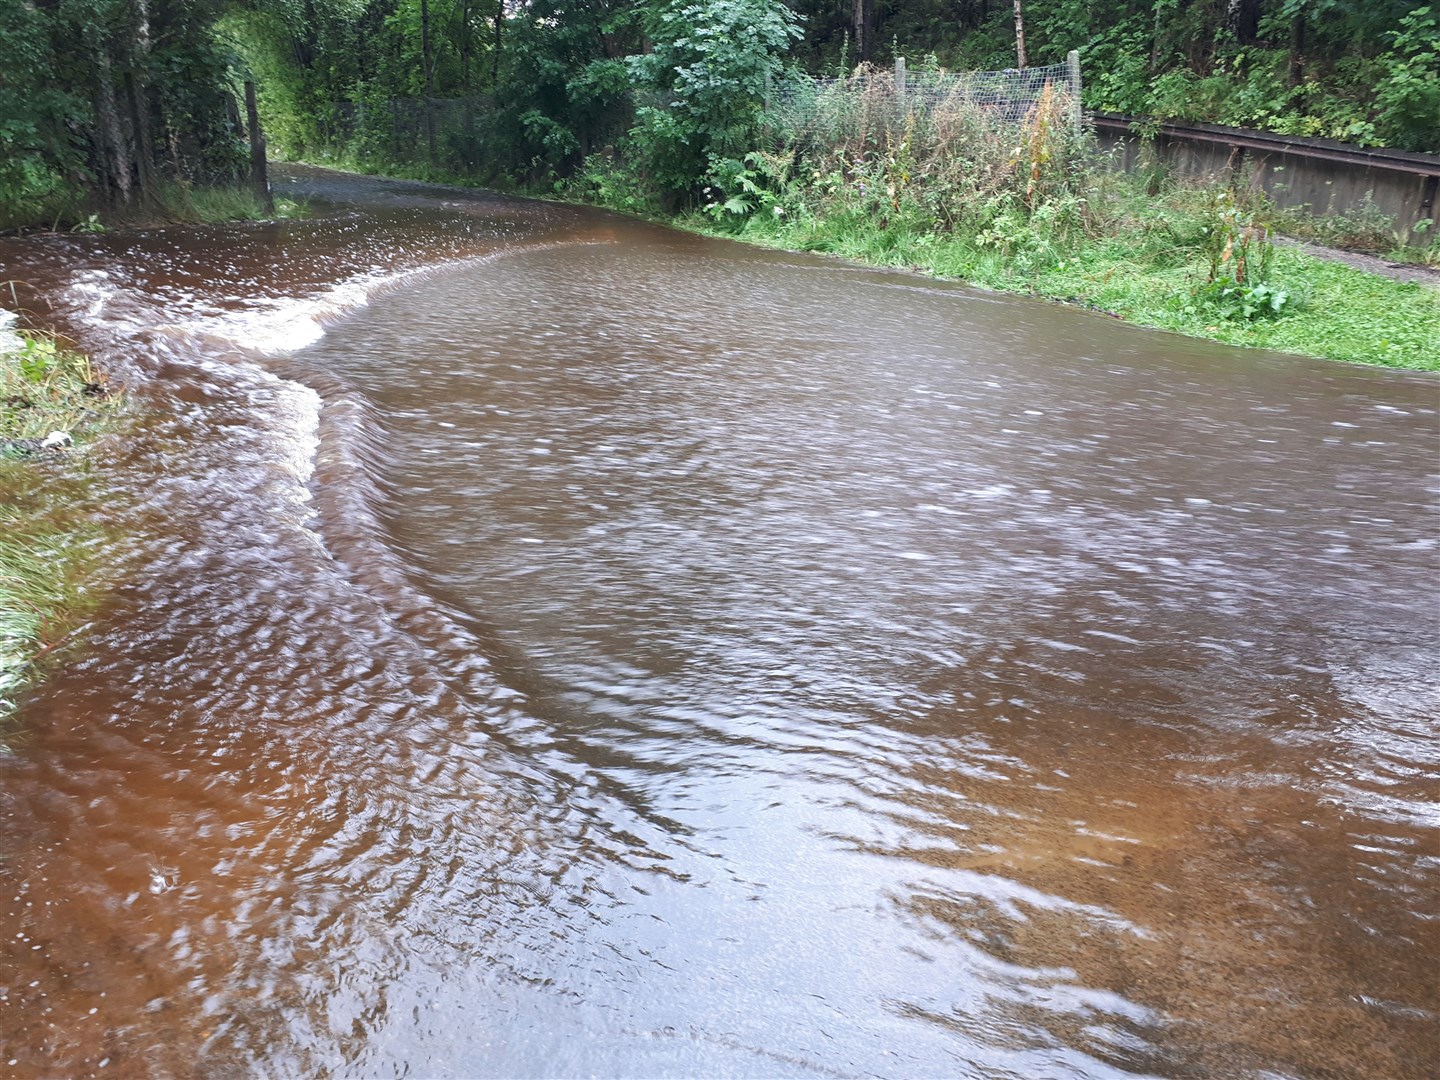 Aviemore's Old Dalfaber Road was inundated